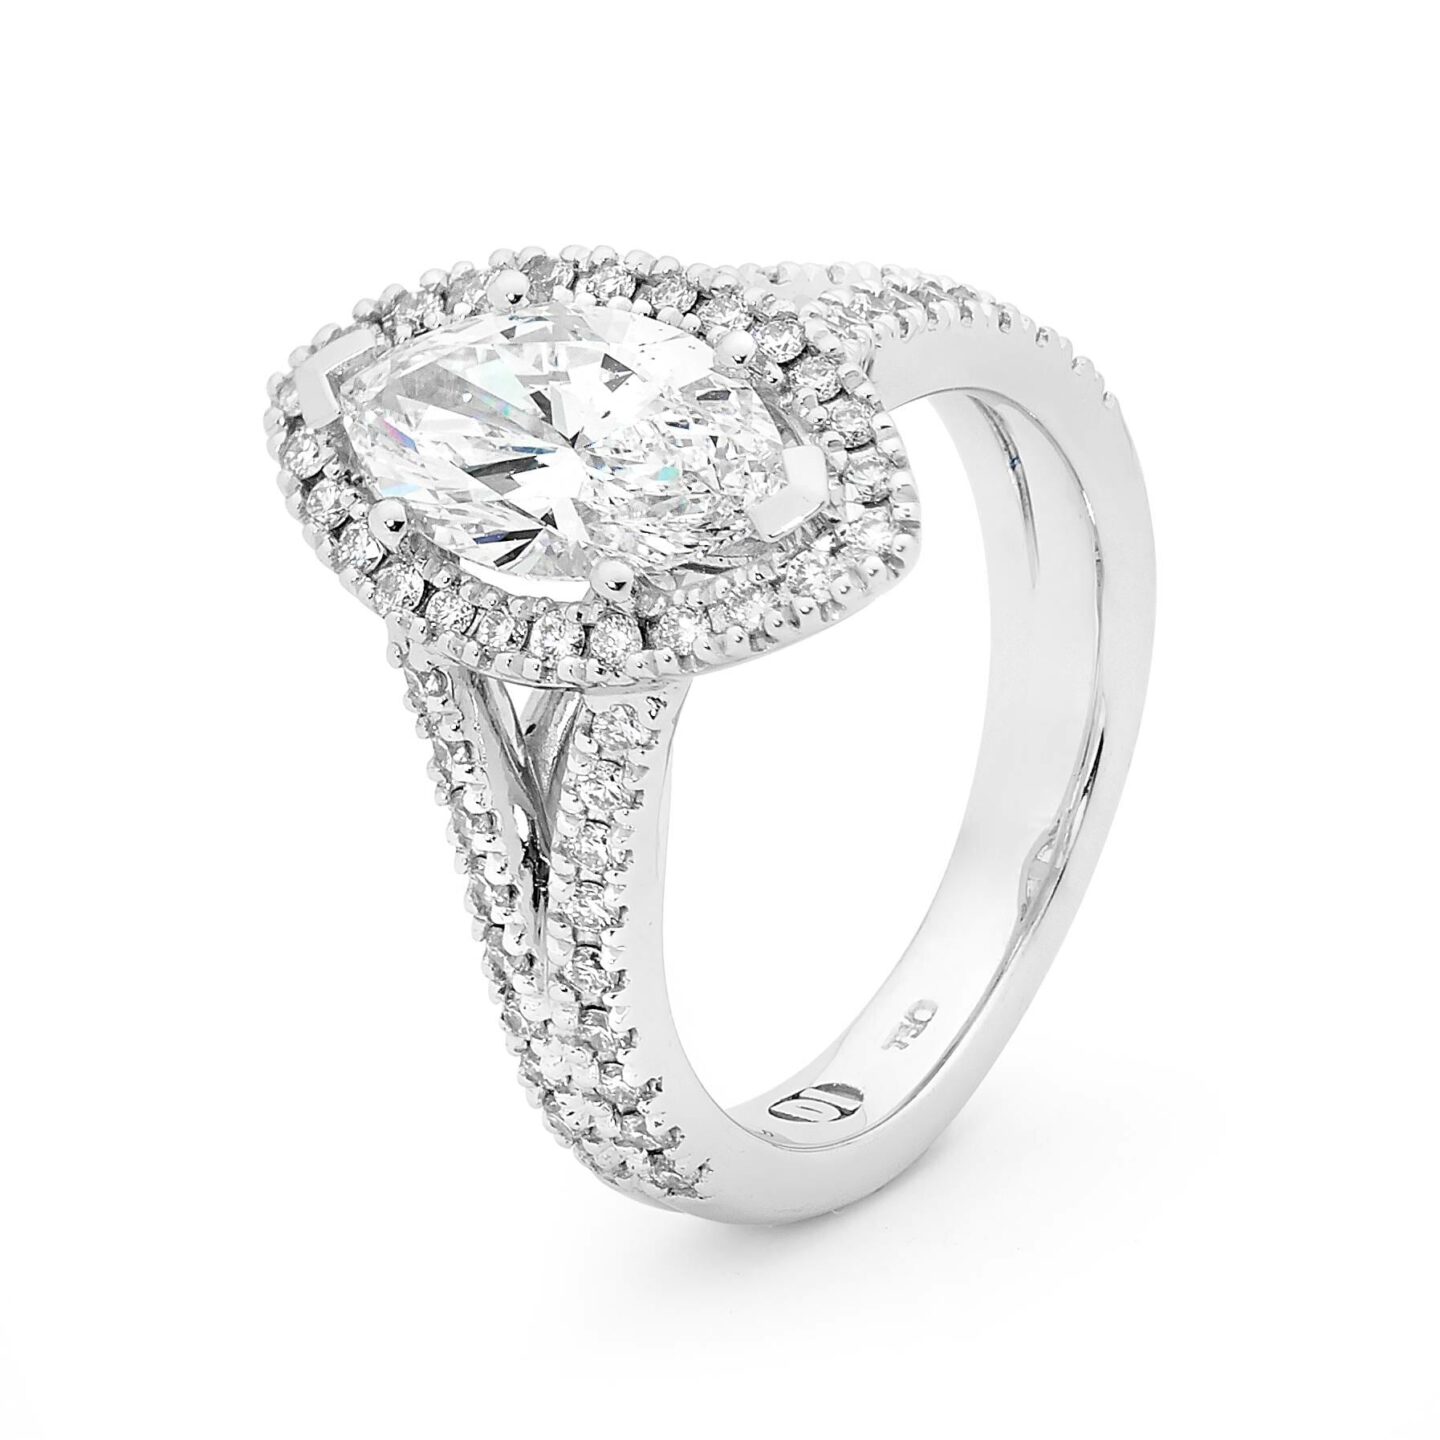 Electra - Marquise Cut Diamond Engagement Ring